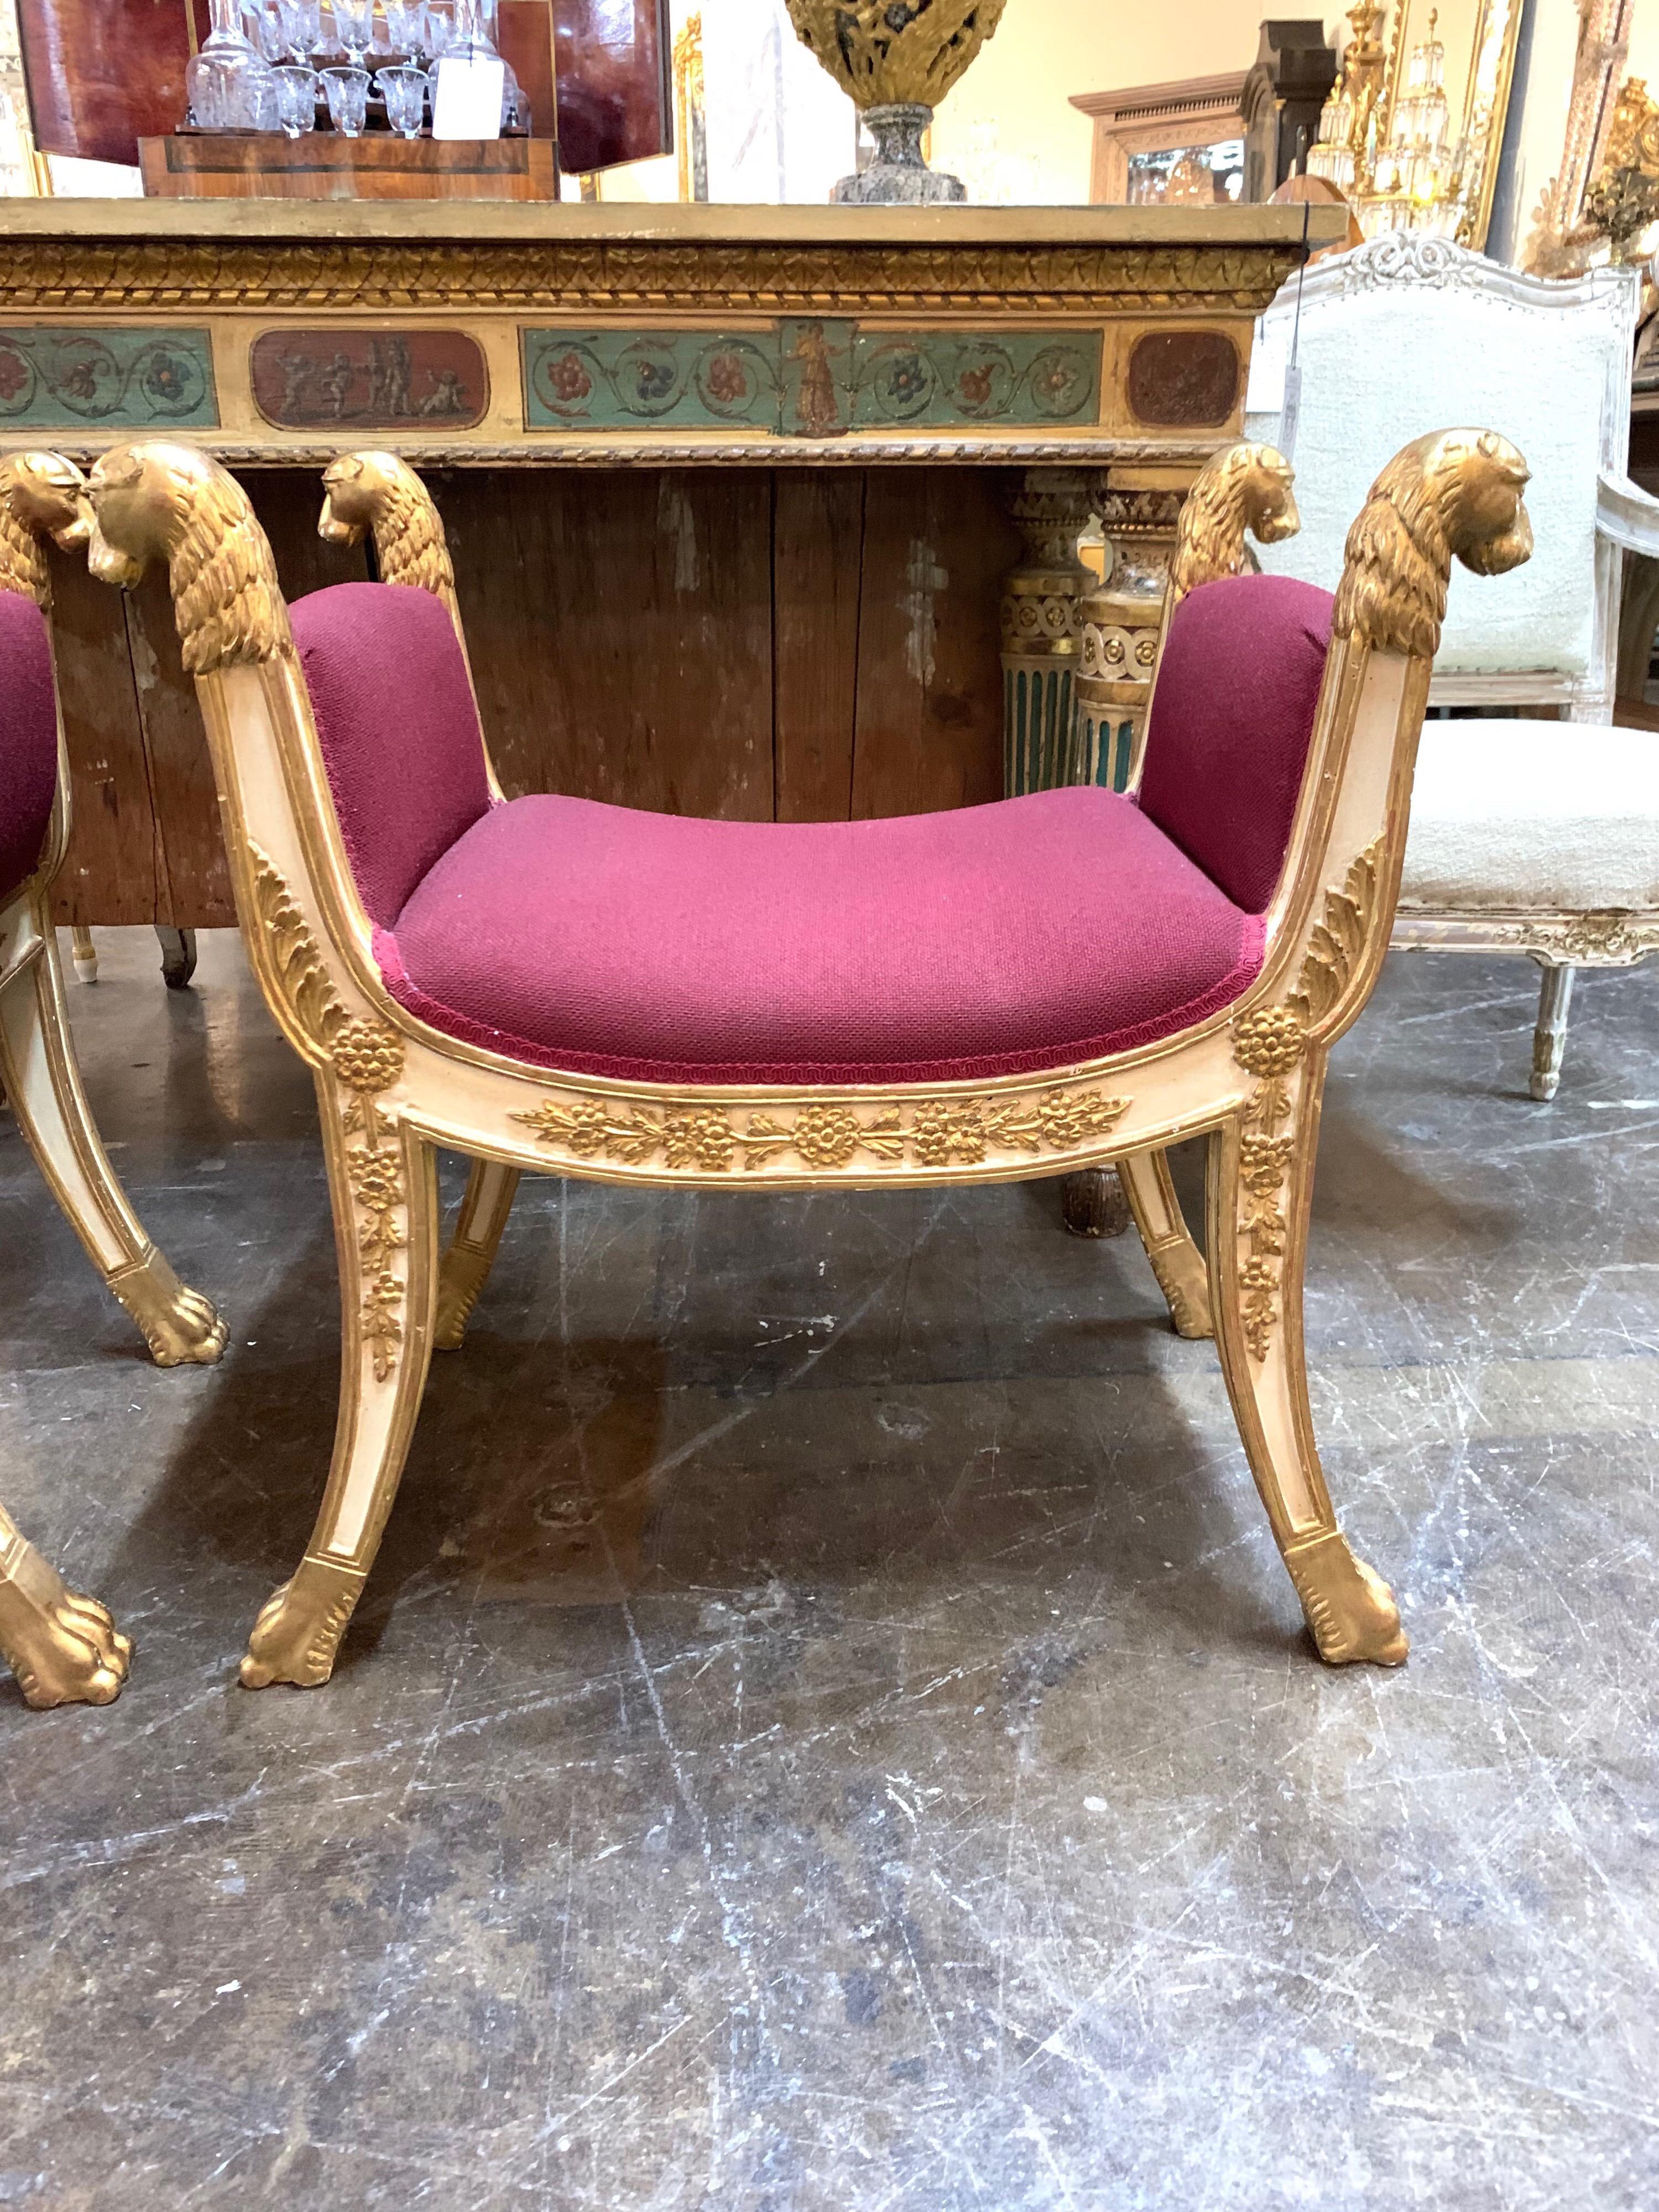 Elegant pair of upholstered Regency style carved and parcel-gilt benches. Lovely carving on this set. Makes a real statement in a Fine home. Sold as a set.